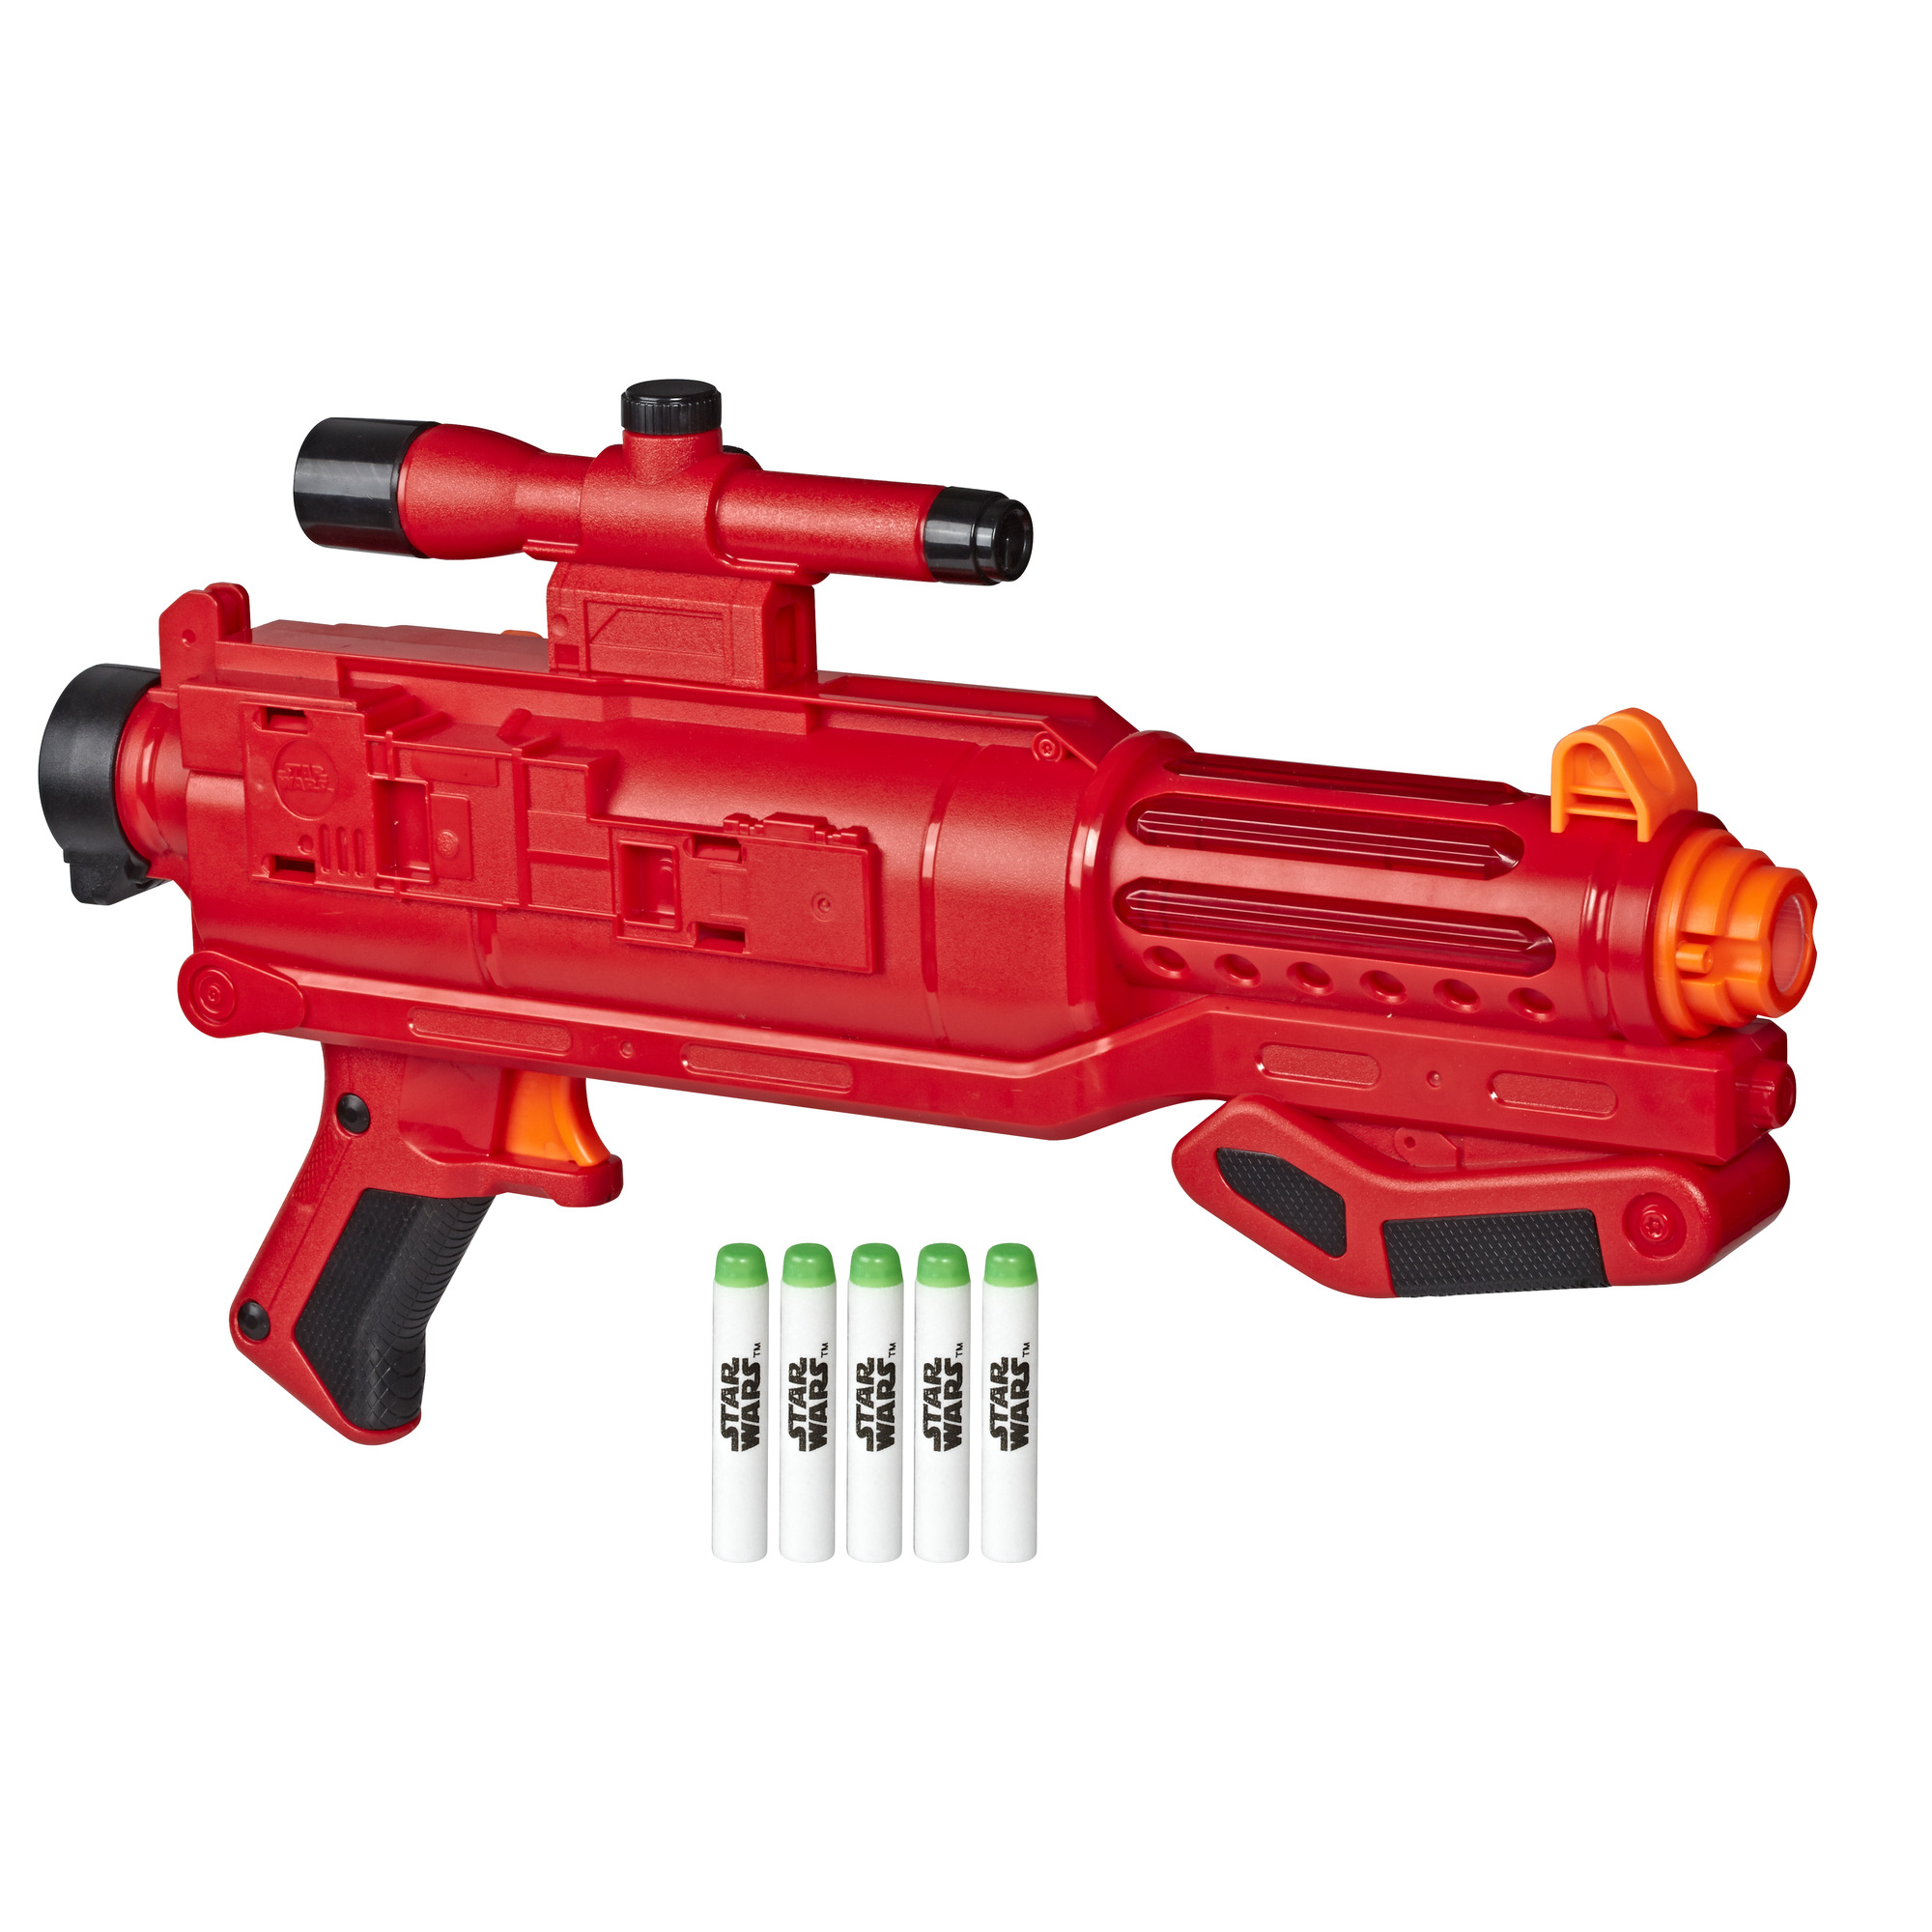 Nerf Star Wars Sith Trooper Blaster, Includes 5 Darts - image 1 of 12